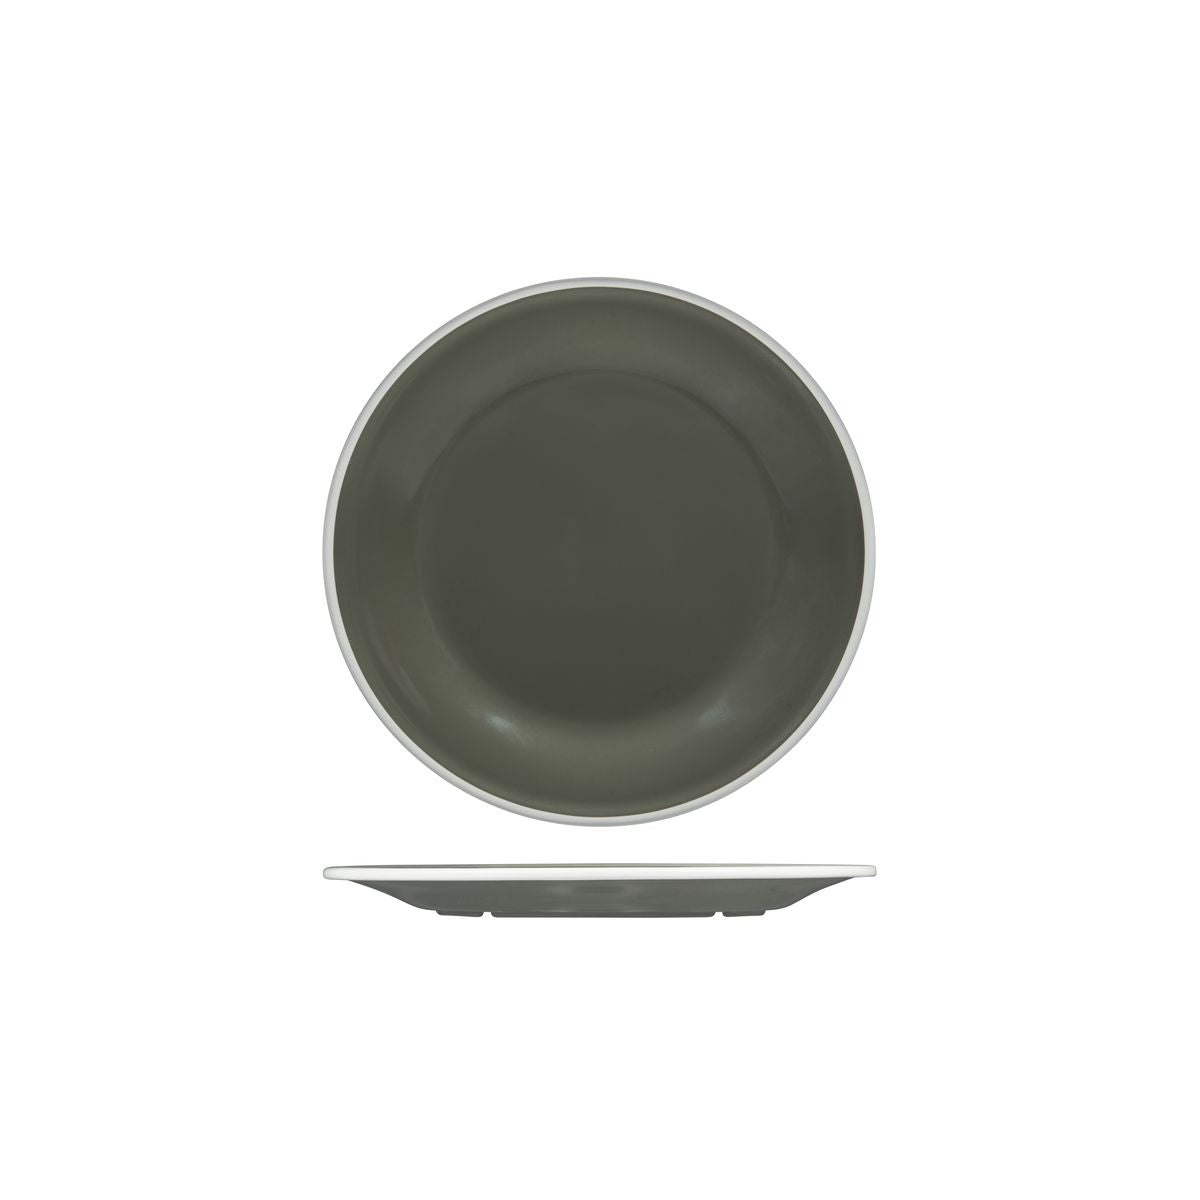 Round Plate, 220mm, Melamine - Grey & White from Ryner Melamine. Sold in boxes of 12. Hospitality quality at wholesale price with The Flying Fork! 